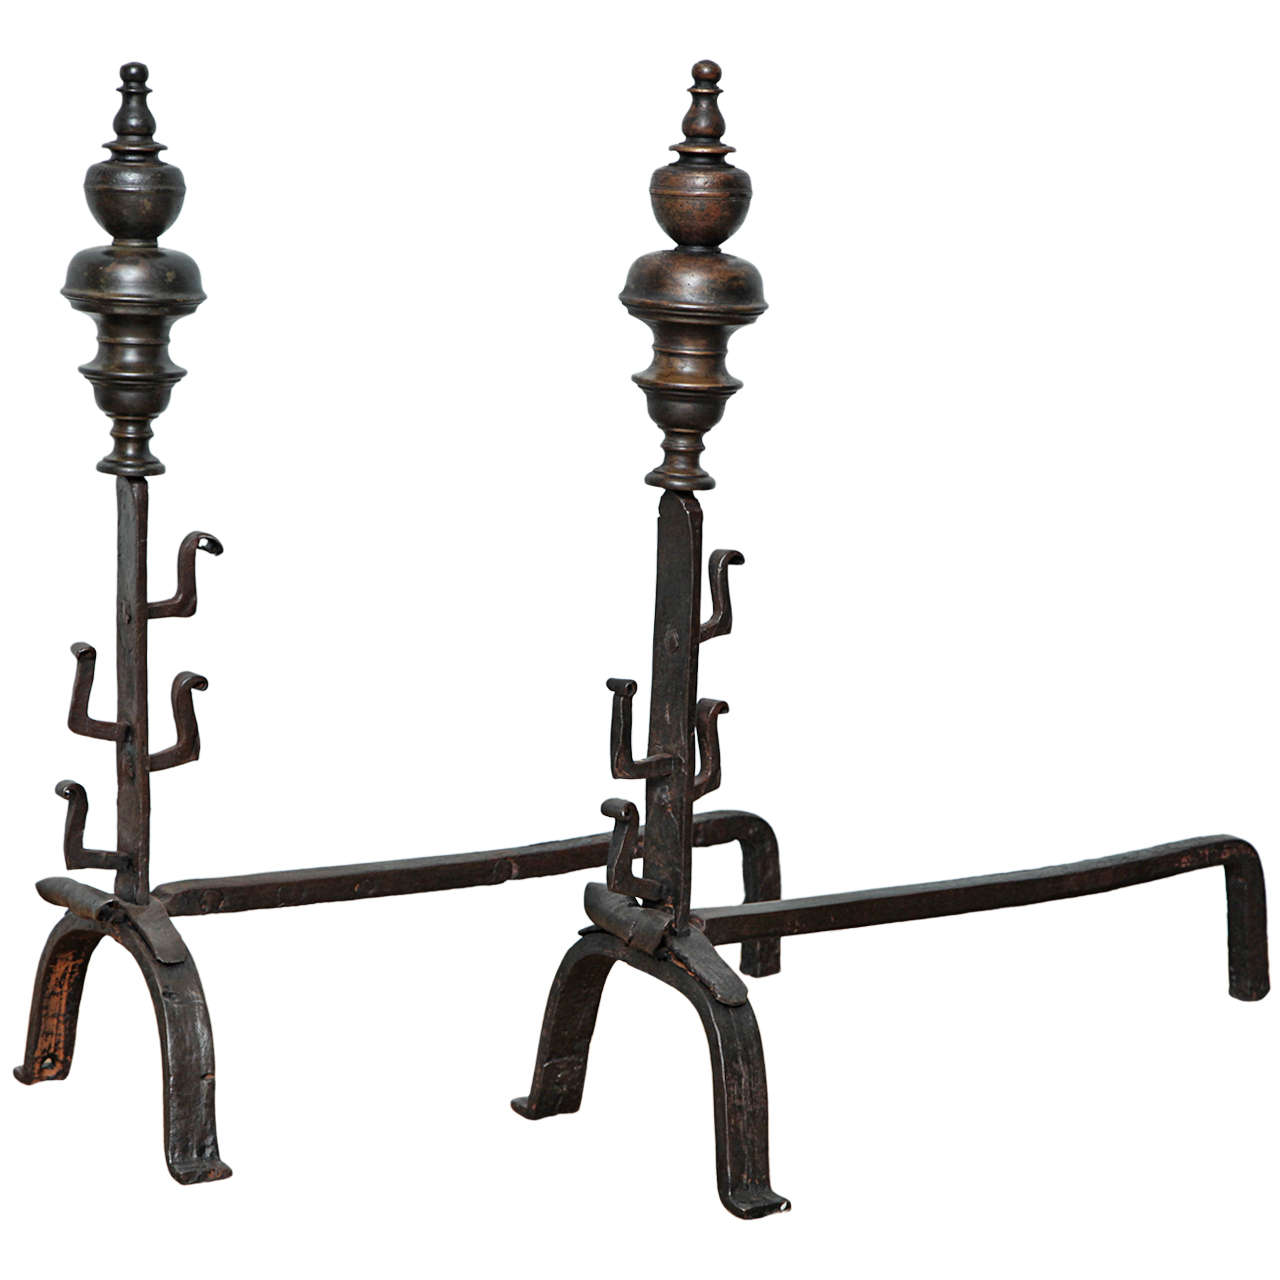 Fine pair of Northern European bronze and wrought iron andirons having unusually large finials over simple shafts having for and aft spit supports and standing on arched legs with simple square toes, both in excellent and unrestored condition, the